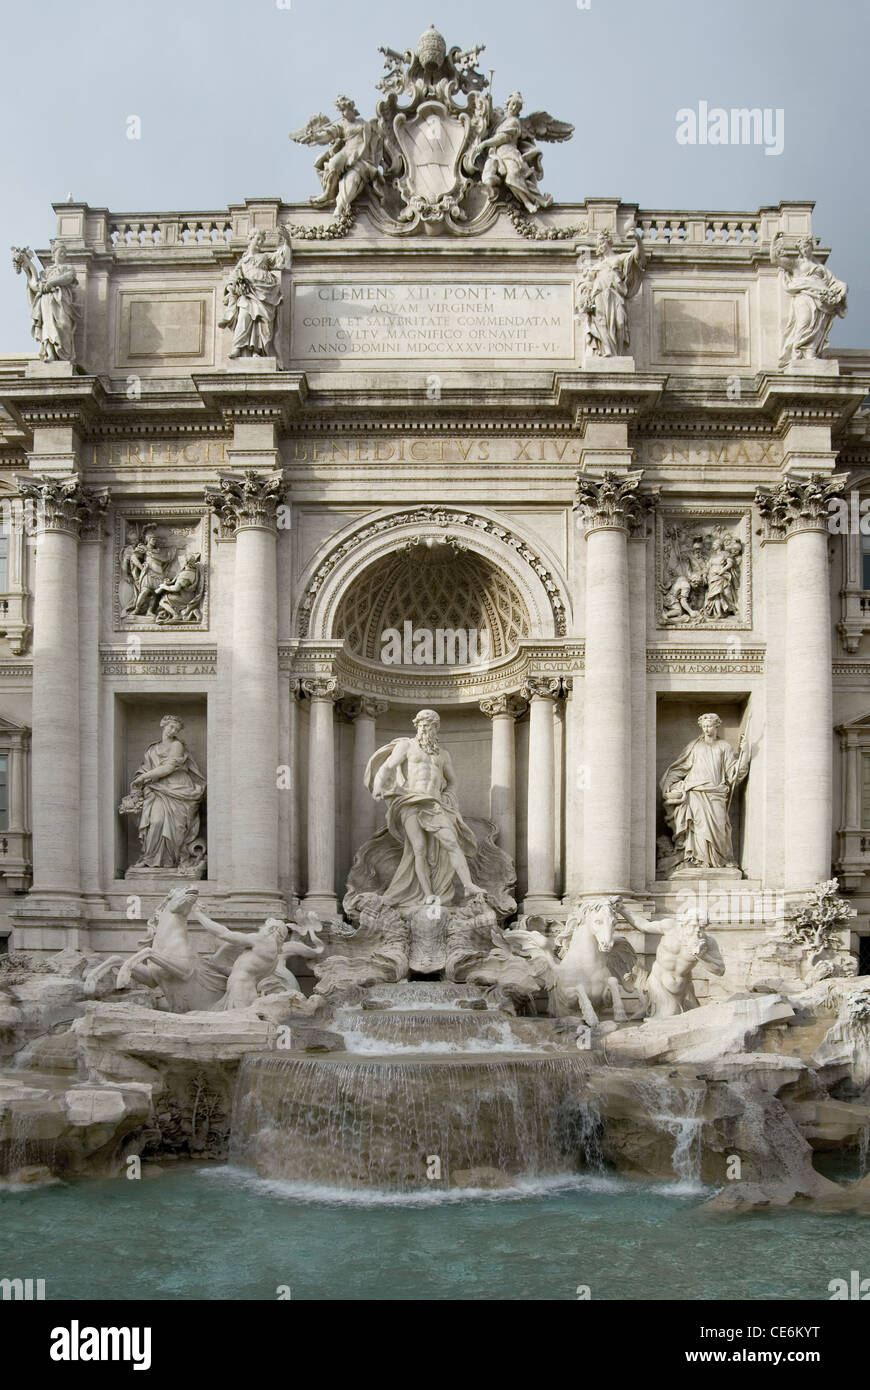 The Trevi Fountain, situated in the Trevi district in Rome, Italy, has become one of the most famous fountains in the world Stock Photo